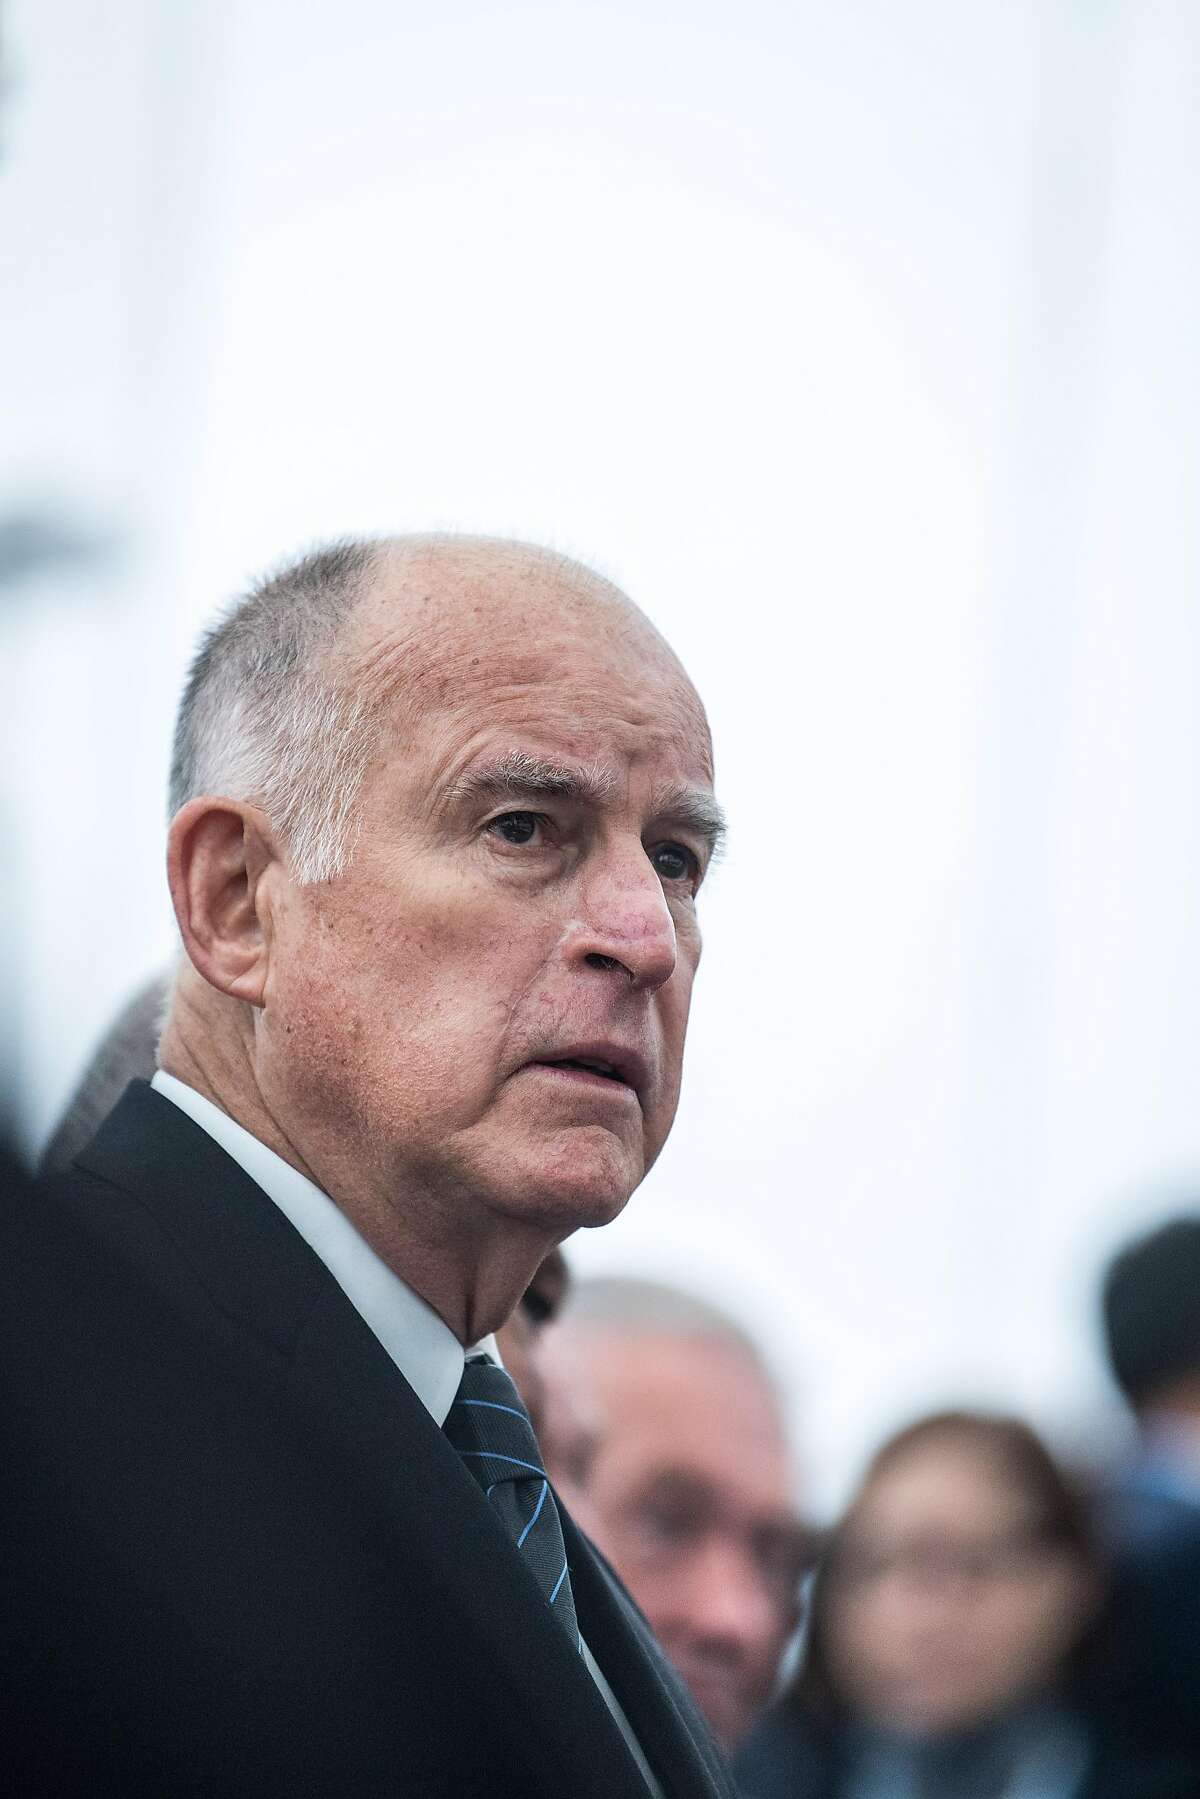 BONN, GERMANY - NOVEMBER 11: California Governor Jerry Brown joins a discussion at the America's Pledge launch event at the U.S. "We Are Still In" pavilion at the COP 23 United Nations Climate Change Conference on November 11, 2017 in Bonn, Germany. America's Pledge is a report detailing the efforts of U.S. states, cities and businesses to keep America on line in fulfilling goals towards carbon reduction set out by the Paris Climate Agreement. U.S. President Donald Trump has announced that the U.S. is withdrawing from the accord and the White House is sending its own delegation of fossil fuel supporters to the COP 23 conference next week to make the case for the continued role of coal and petroleum in world energy needs. (Photo by Lukas Schulze/Getty Images)